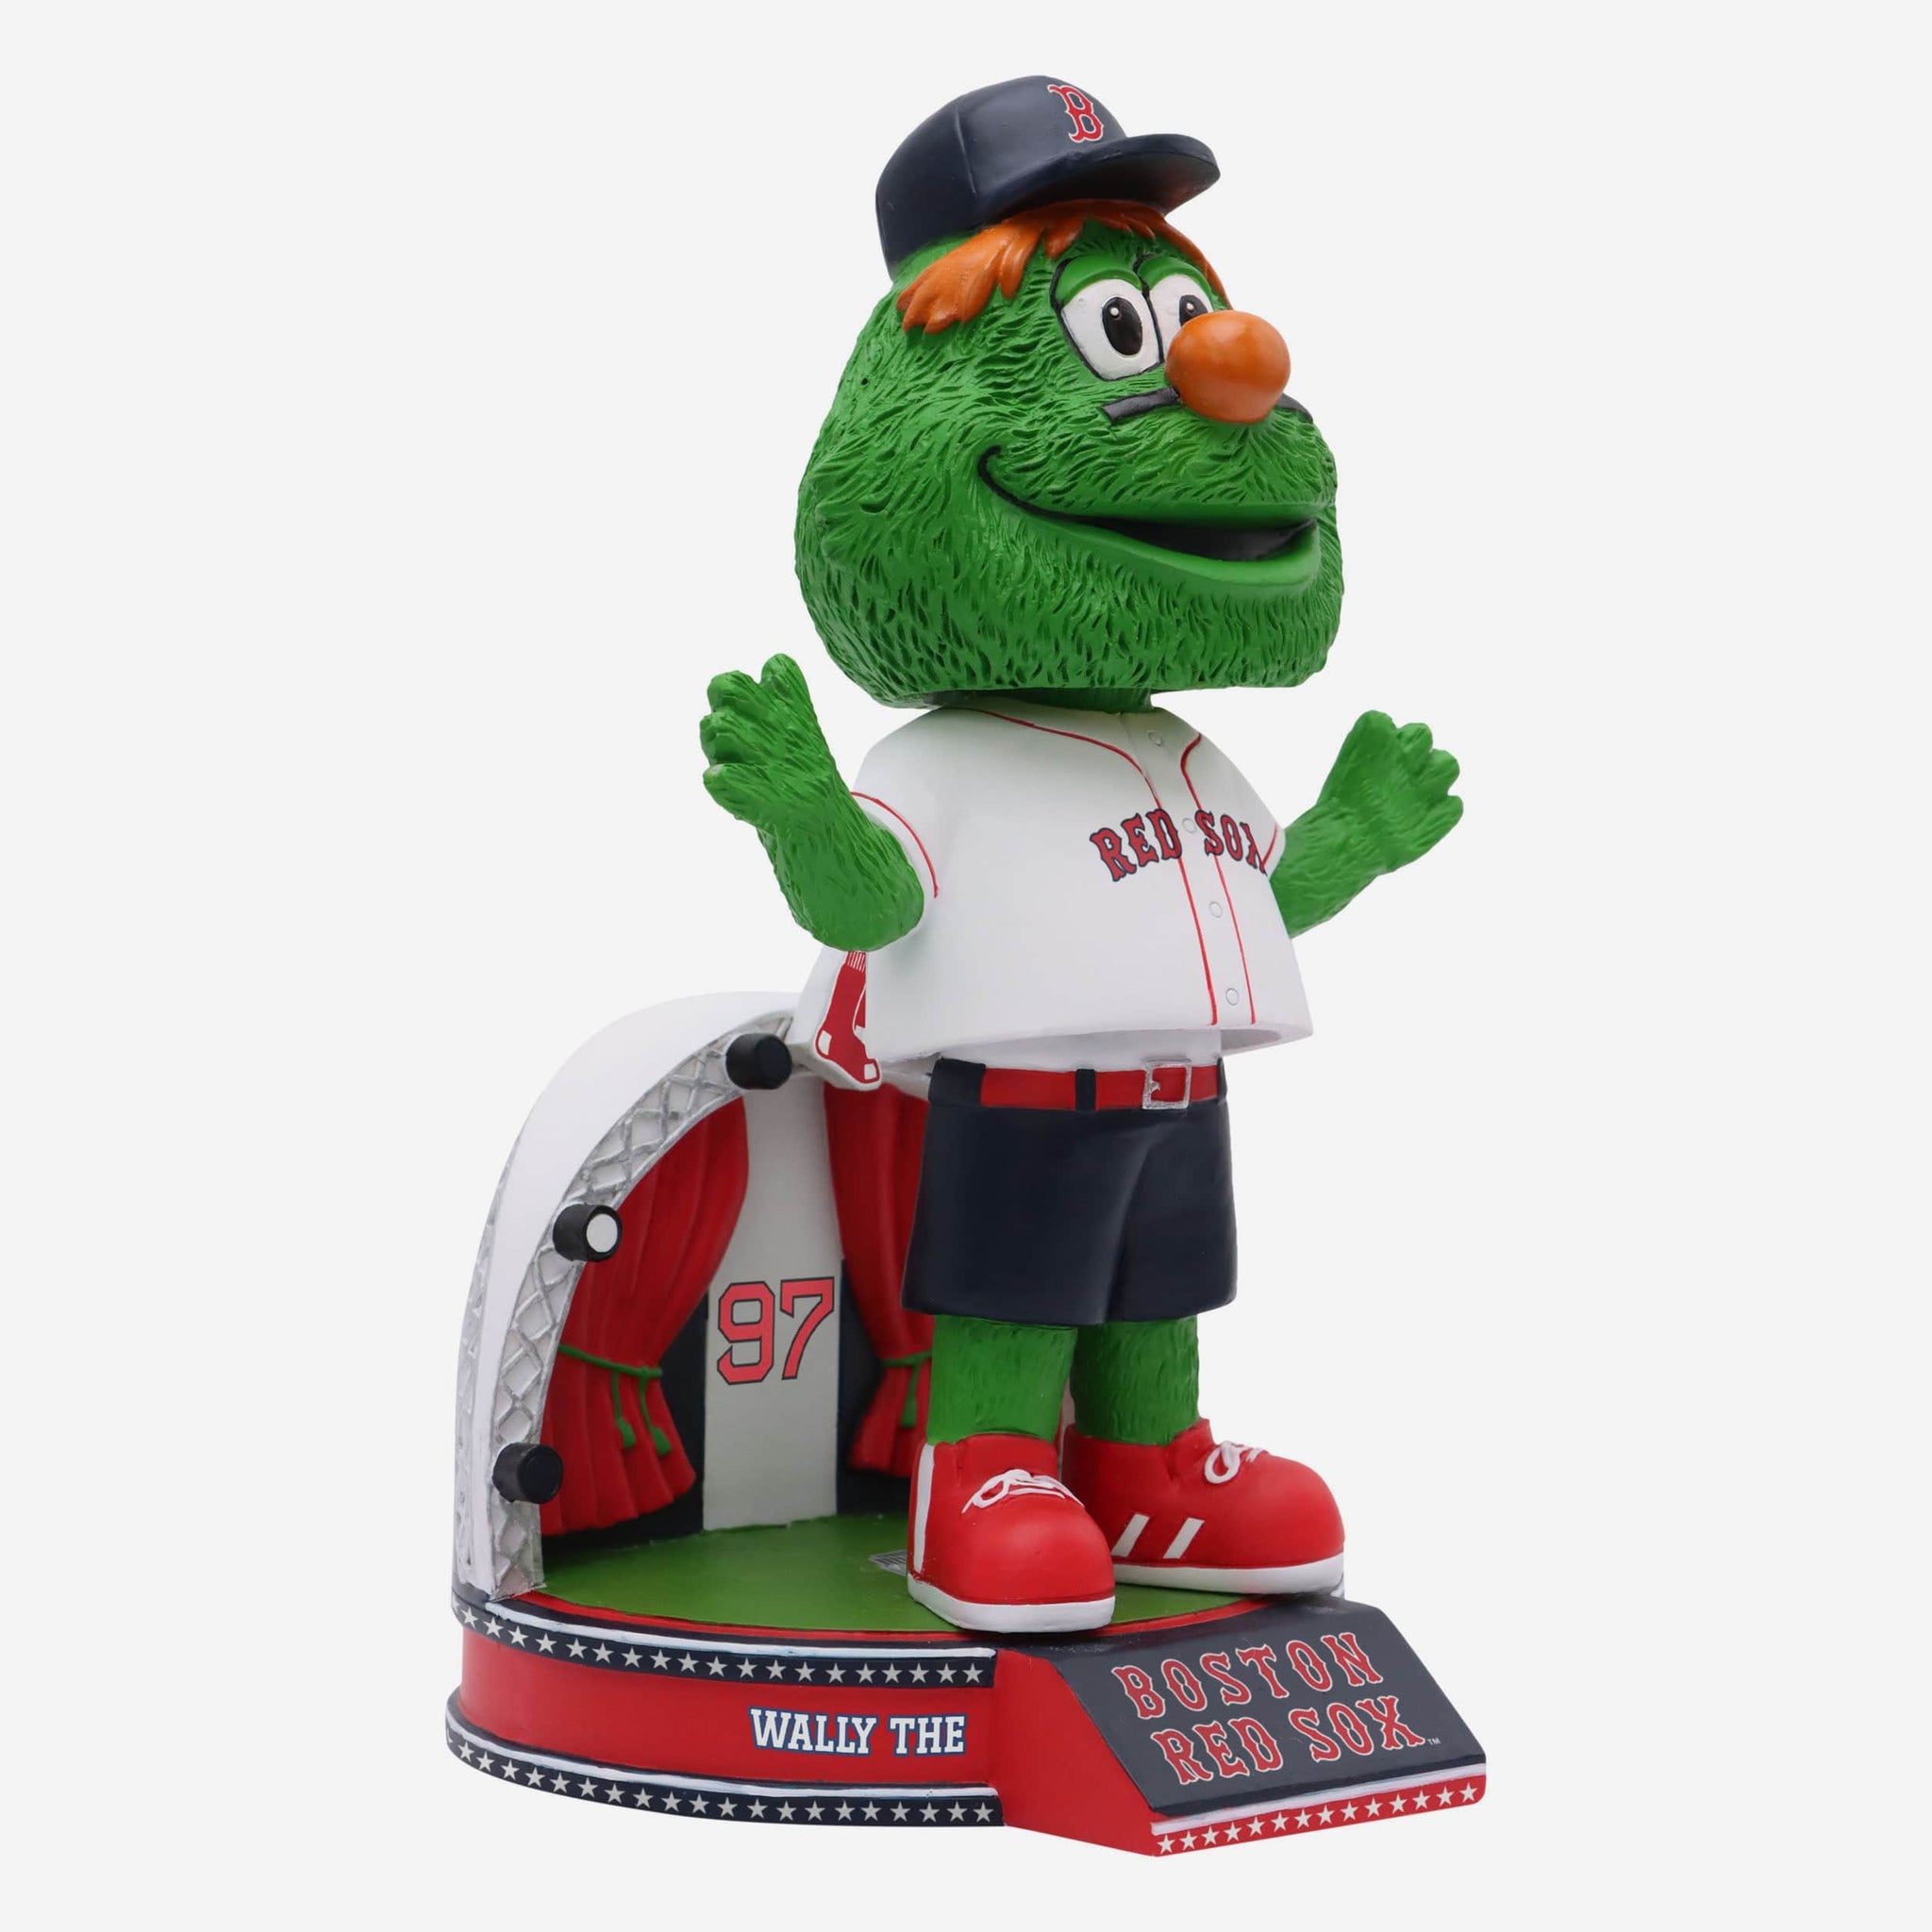 Wally the Green Monster Boston Red Sox Reversible Mascot Hoodeez FOCO